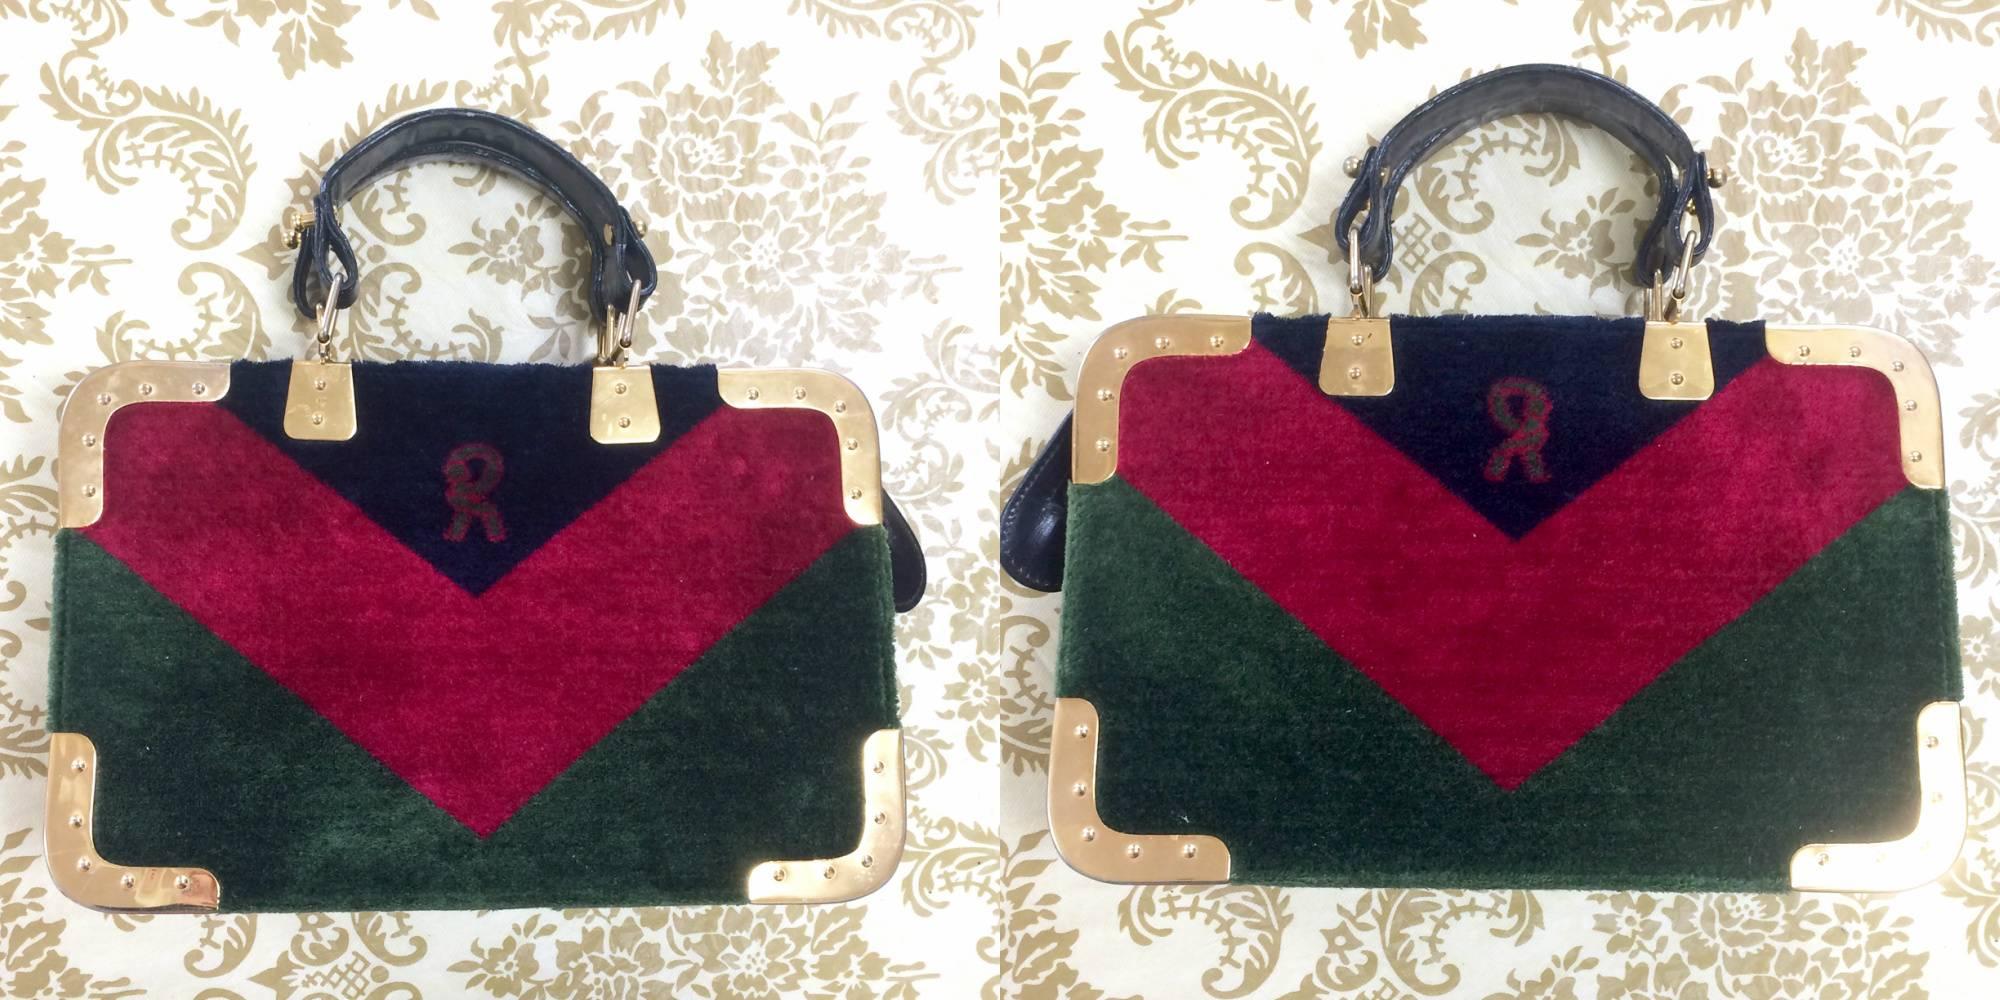 1970s. Vintage Roberta di Camerino red, green, and navy chevron velvet  square doctor bag with golden hardware frames. Rare masterpiece.

For all Roberta vintage lovers, this purse is the one for you!
Introducing one of the rarest masterpieces from